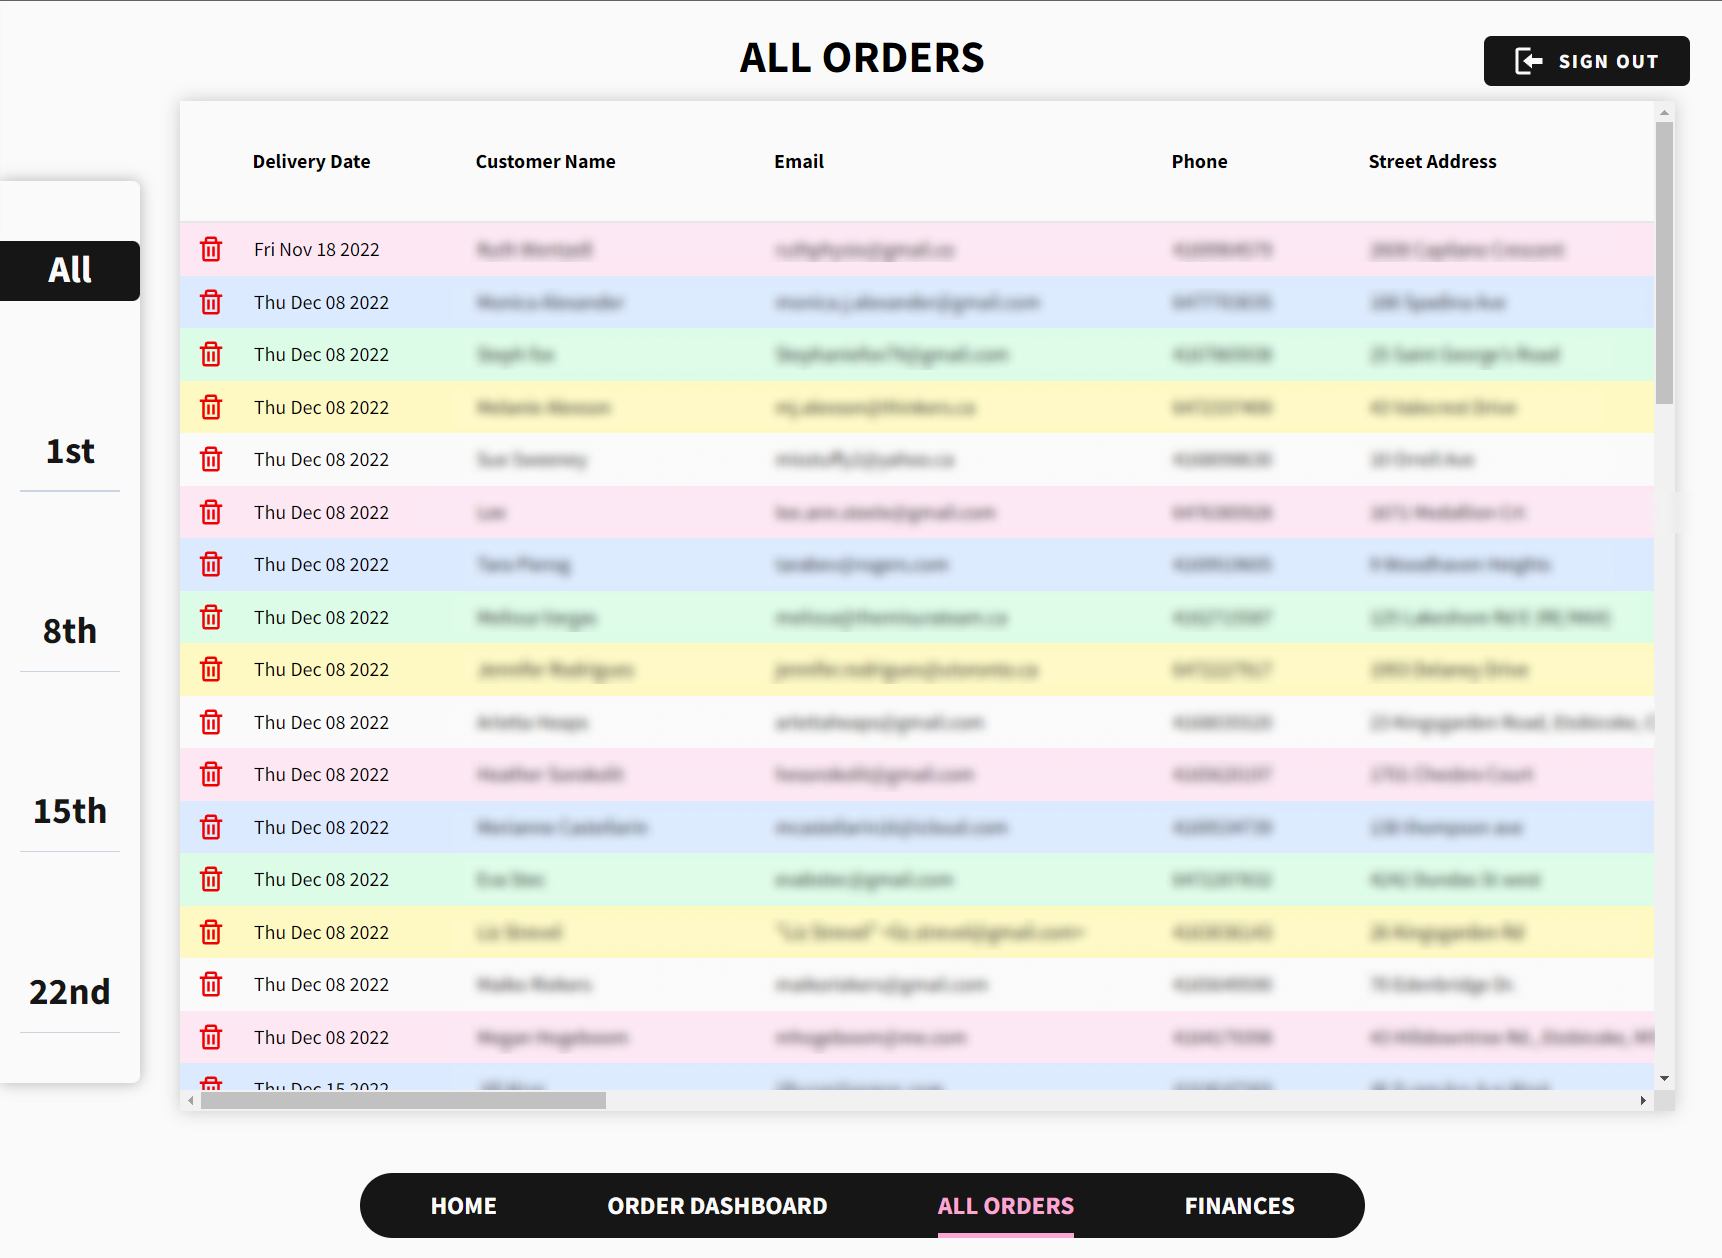 table displaying order information for all orders